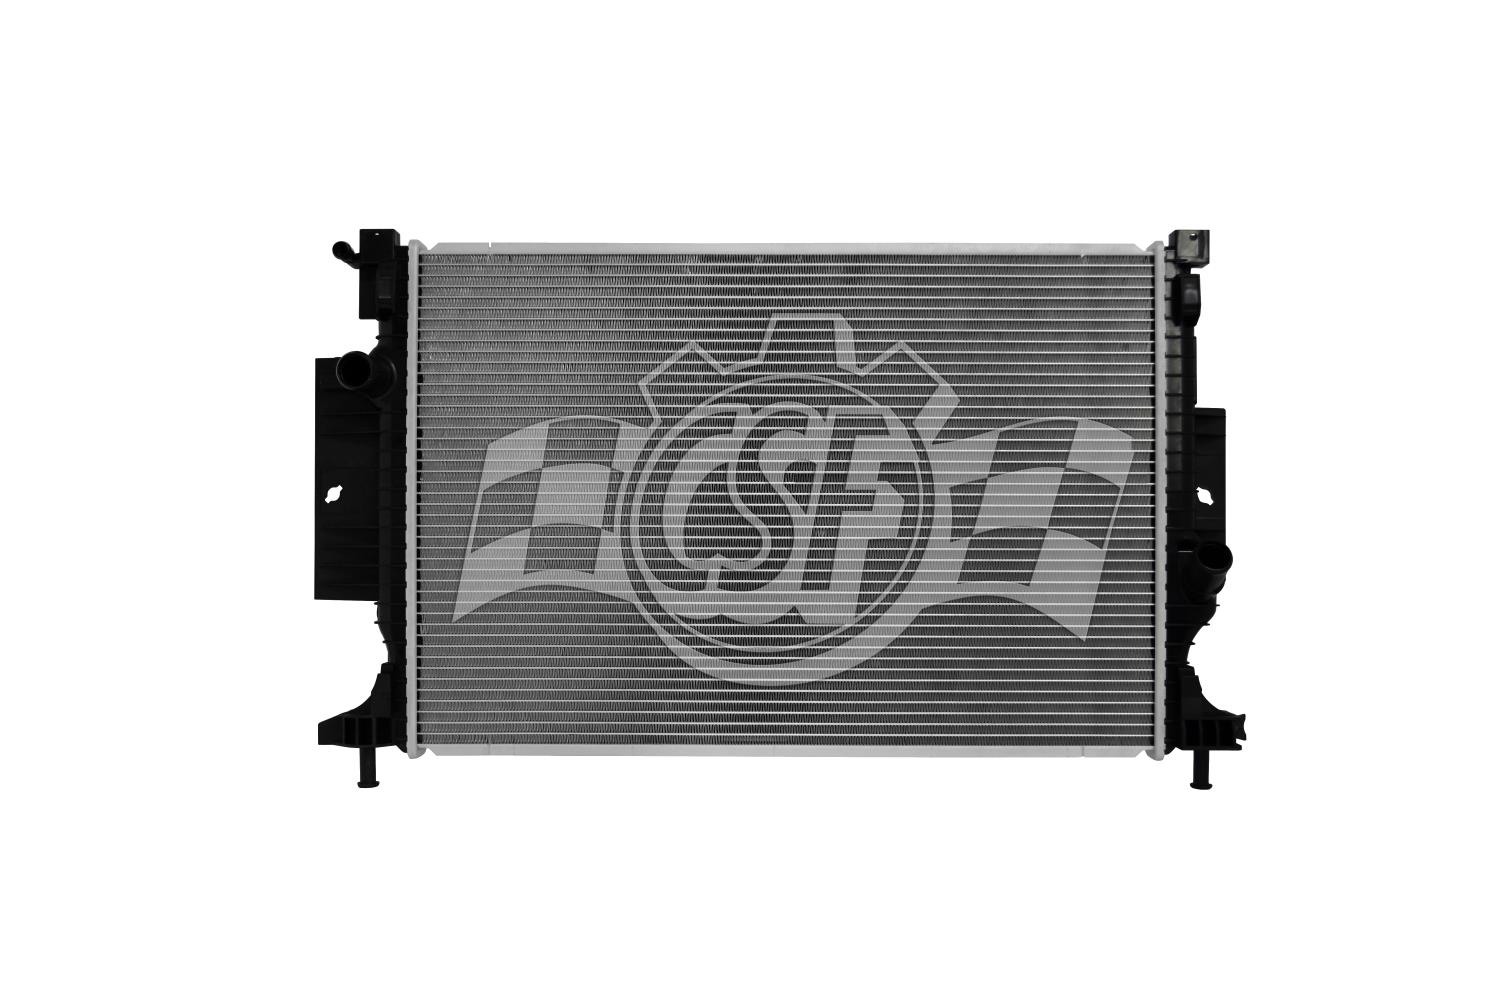 OE-Style 1-Row Radiator, Ford Transit Connect, Lincoln MKC, Ford Escape